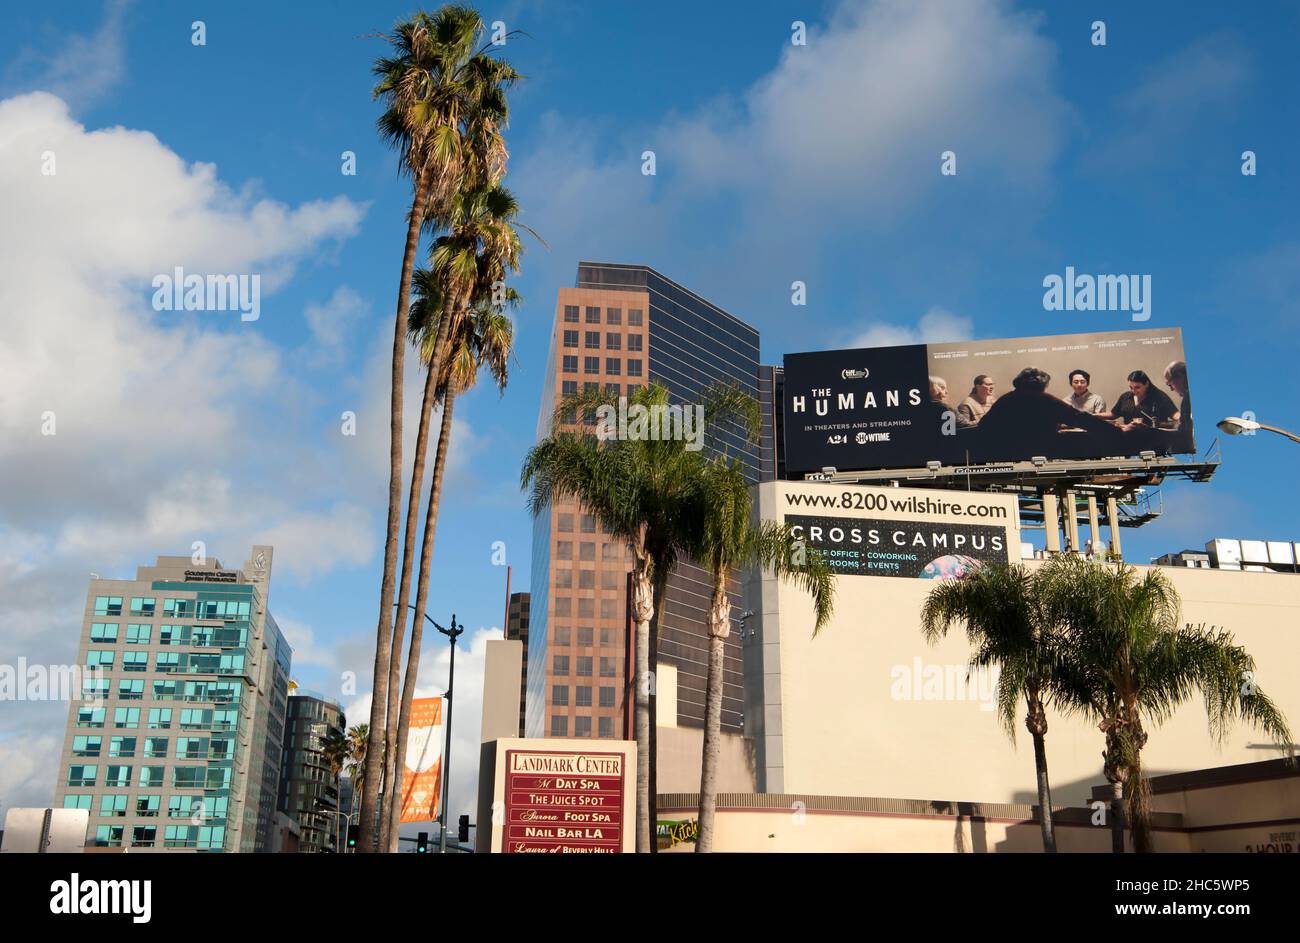 Wilshire Boulevard in mid-town Los Angeles with buildings and a billboard for a Showtime movie The Humans. Stock Photo